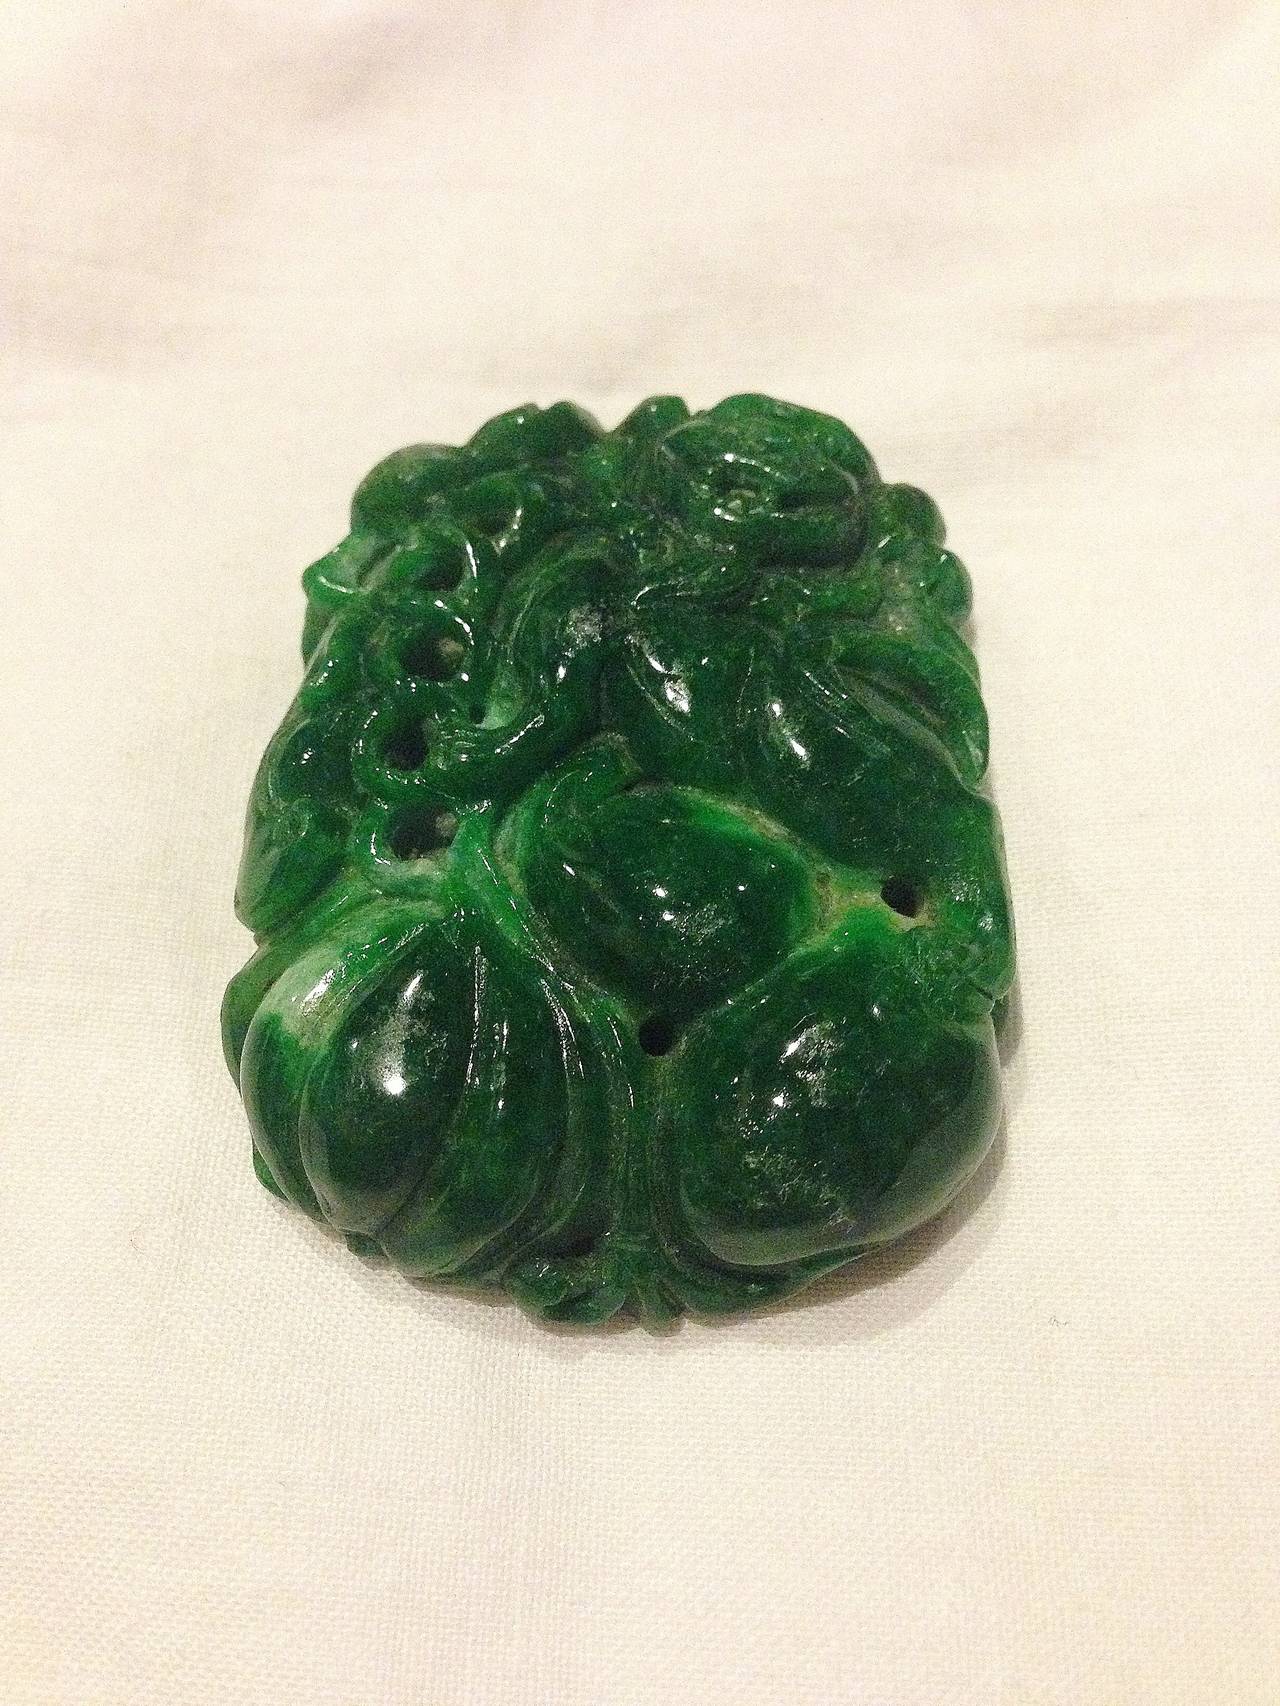 This splendid, 52.1 gram, glossy green jade piece features exquisite full carvings. A foo dog occupies the top right corner residing over gourd and pumpkin, the three symbols for 